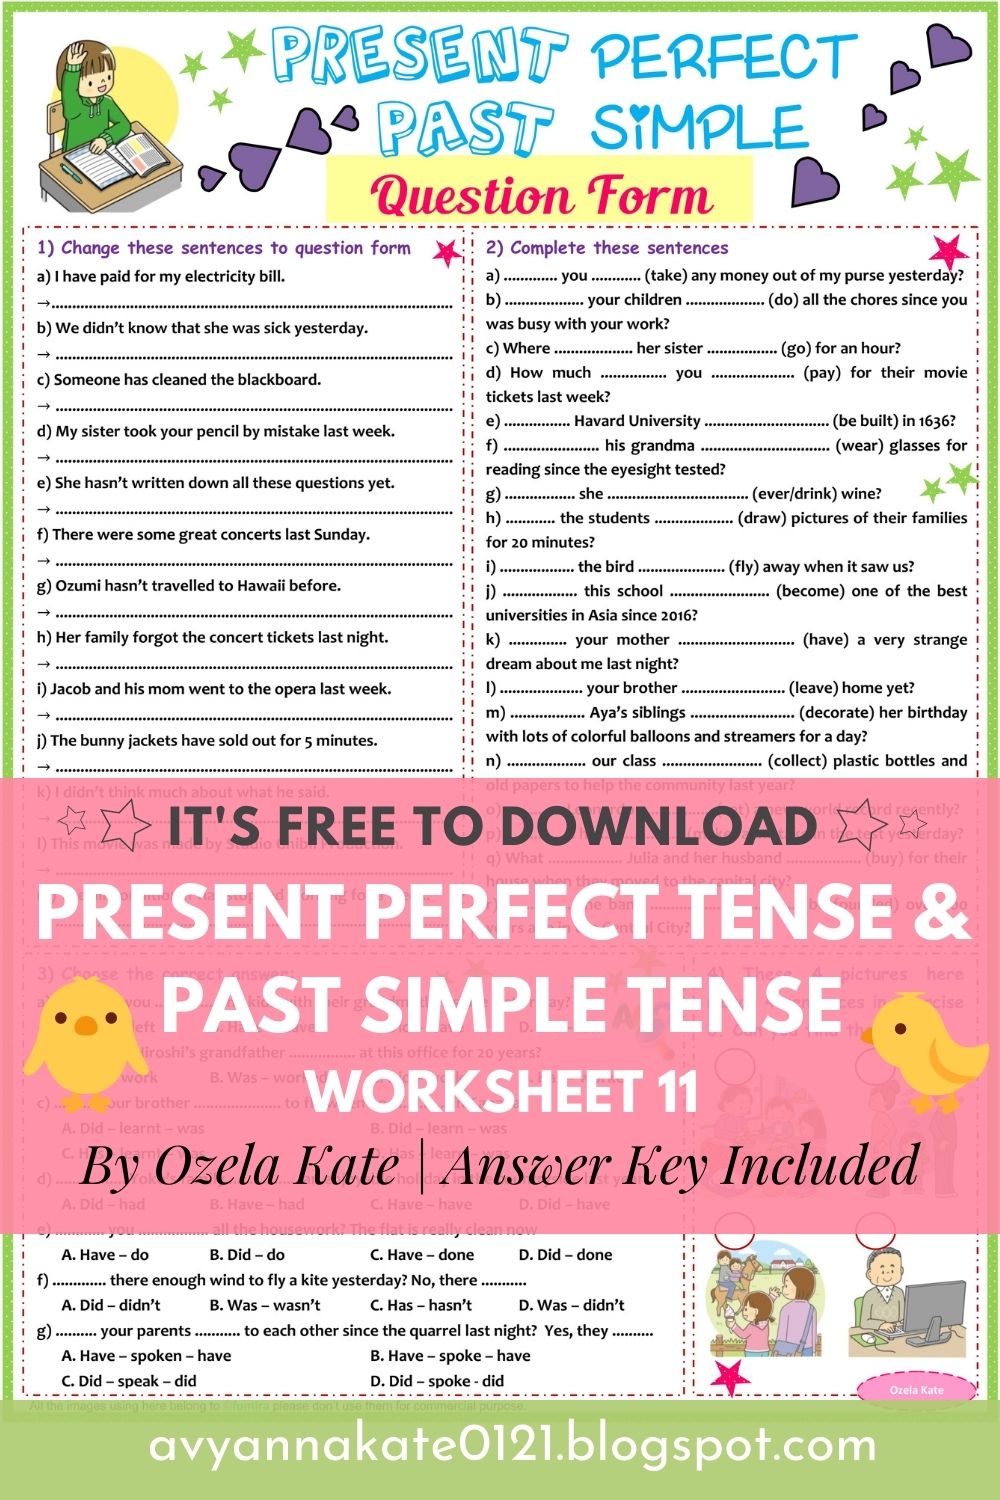 ozela-kate-worksheet-for-children-and-beginner-tenses-present-perfect-tense-and-past-simple